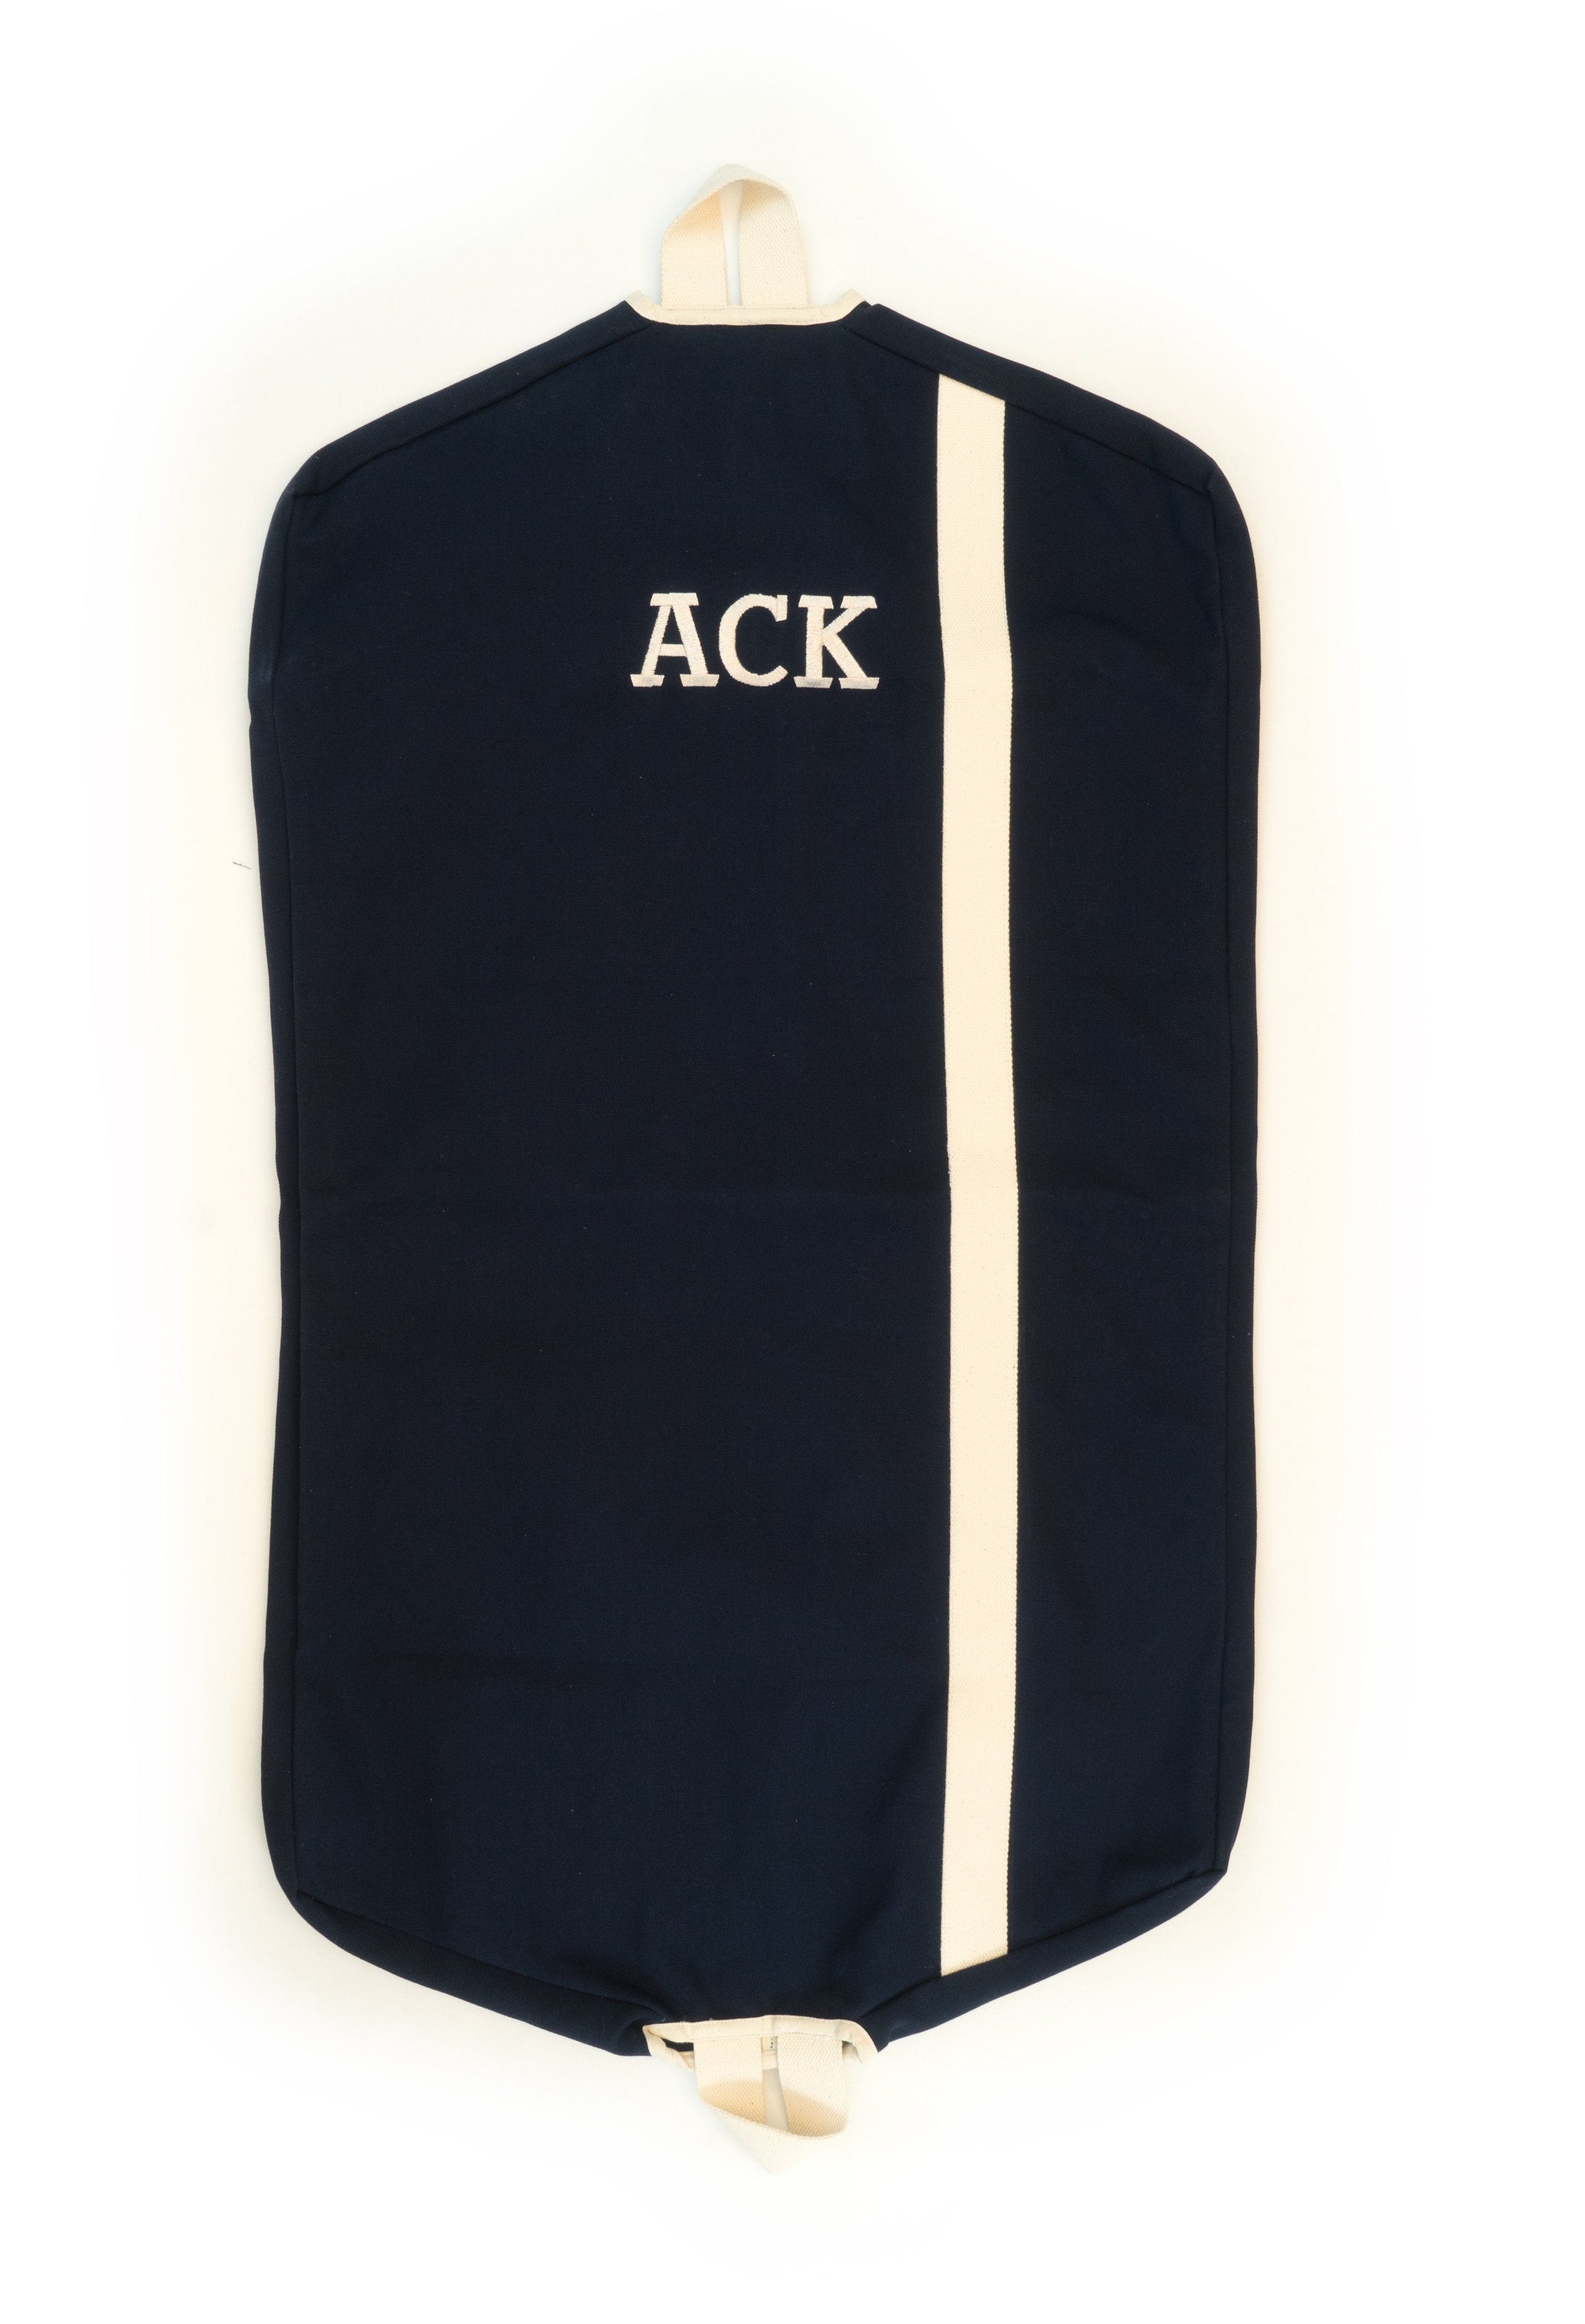 Garment Bag Personalized With A Monogram